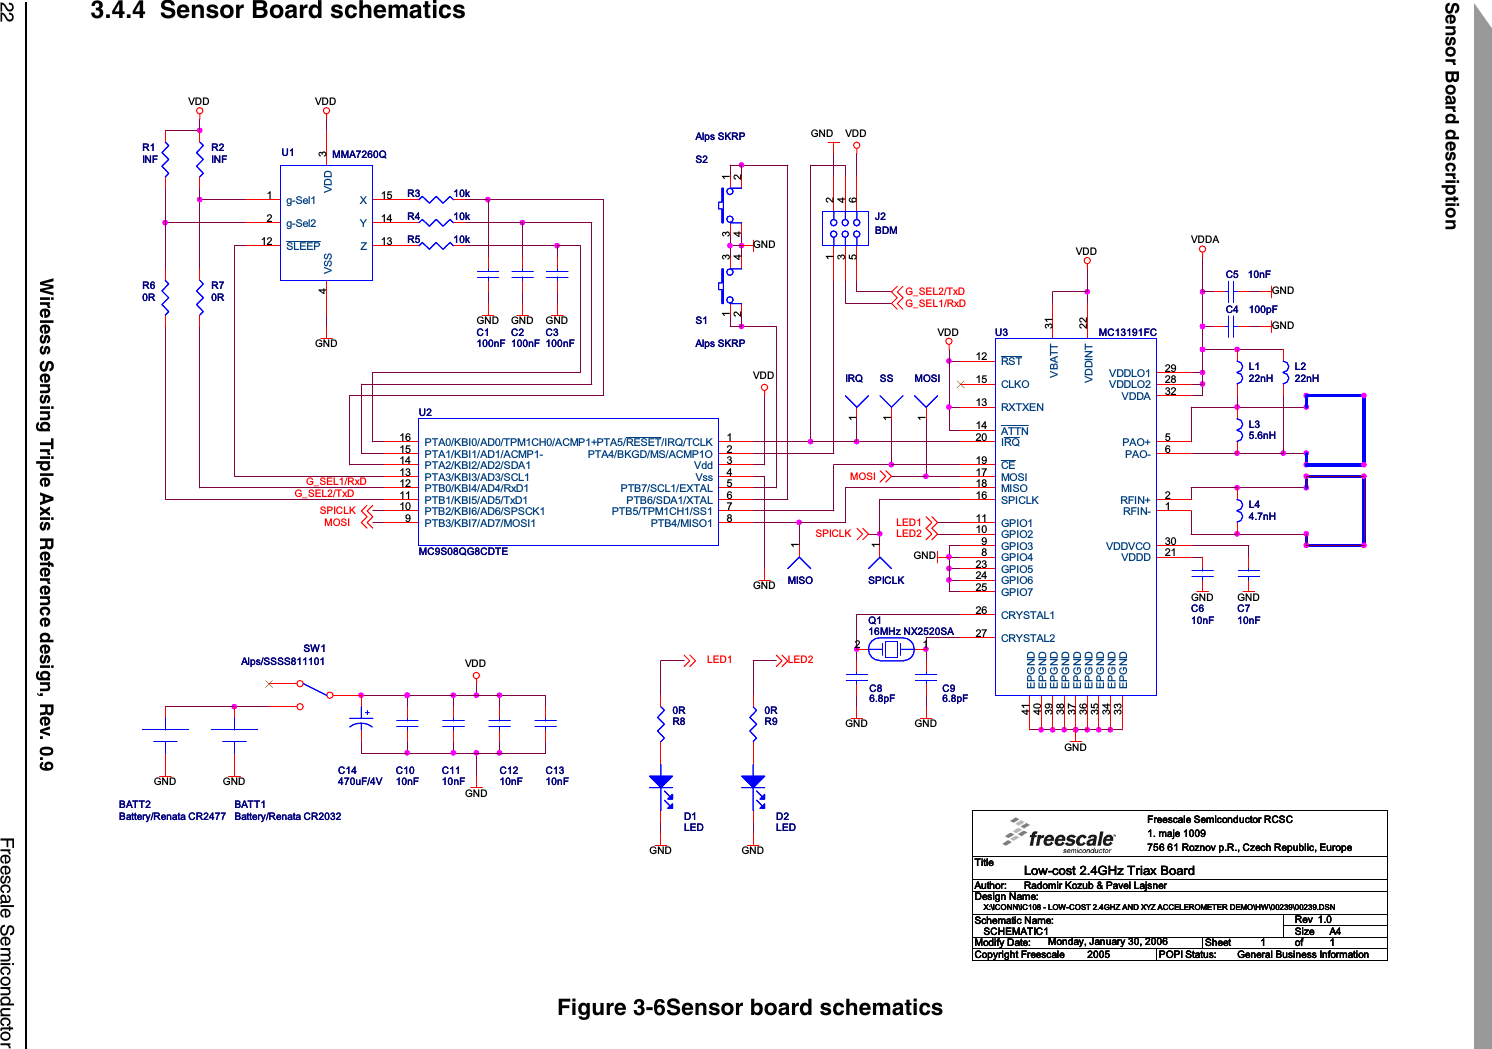 Wireless Sensing Triple Axis Reference design, Rev. 0.922 Freescale SemiconductorSensor Board description3.4.4  Sensor Board schematicsFigure 3-6Sensor board schematicsG_SEL2/TxDG_SEL1/RxDVDDVDDVDDVDDVDDVDDAGND GNDGNDGND GNDGNDGNDGNDGNDGND GND GND GNDGNDGNDGNDVDDVDDGND GNDGNDGNDMOSISPICLKMOSIG_SEL1/RxDG_SEL2/TxDLED1LED2LED1 LED2SPICLKTitleSizeDesign Name:RevModify Date: Sheet ofSchematic Name:Copyright FreescalePOPI Status:Author:1.0Low-cost 2.4GHz Triax BoardFreescale Semiconductor RCSC1. maje 1009756 61 Roznov p.R., Czech Republic, EuropeA41 1Monday, January 30, 2006SCHEMATIC1General Business InformationRadomir Kozub &amp; Pavel Lajsner2005X:\ICONN\IC108 - LOW-COST 2.4GHZ AND XYZ ACCELEROMETER DEMO\HW\00239\00239.DSNTitleSizeDesign Name:RevModify Date: Sheet ofSchematic Name:Copyright FreescalePOPI Status:Author:1.0Low-cost 2.4GHz Triax BoardFreescale Semiconductor RCSC1. maje 1009756 61 Roznov p.R., Czech Republic, EuropeA41 1Monday, January 30, 2006SCHEMATIC1General Business InformationRadomir Kozub &amp; Pavel Lajsner2005X:\ICONN\IC108 - LOW-COST 2.4GHZ AND XYZ ACCELEROMETER DEMO\HW\00239\00239.DSNTitleSizeDesign Name:RevModify Date: Sheet ofSchematic Name:Copyright FreescalePOPI Status:Author:1.0Low-cost 2.4GHz Triax BoardFreescale Semiconductor RCSC1. maje 1009756 61 Roznov p.R., Czech Republic, EuropeA41 1Monday, January 30, 2006SCHEMATIC1General Business InformationRadomir Kozub &amp; Pavel Lajsner2005X:\ICONN\IC108 - LOW-COST 2.4GHZ AND XYZ ACCELEROMETER DEMO\HW\00239\00239.DSN12Q116MHz NX2520SAQ116MHz NX2520SAR2INFR2INF1SSSSR3 10kR3 10kC1110nFC1110nFC1210nFC1210nFR1INFR1INFR5 10kR5 10kBATT1Battery/Renata CR2032BATT1Battery/Renata CR20321 23 465J2BDMJ2BDMRFIN- 1RFIN+ 2PAO+ 5PAO- 6GPIO48GPIO39GPIO210 GPIO111RST12RXTXEN13ATTN14CLKO15SPICLK16MOSI17MISO18CE19IRQ20VDDD 21VDDINT 22GPIO523GPIO624GPIO725CRYSTAL126CRYSTAL227VDDLO2 28VDDLO1 29VDDVCO 30VBATT 31VDDA 32EPGND36 EPGND37 EPGND38 EPGND39 EPGND40 EPGND41EPGND35EPGND34EPGND33U3 MC13191FCU3 MC13191FCC610nFC610nFC710nFC710nFD2LEDD2LEDL222nHL222nH1SPICLKSPICLKg-Sel11g-Sel22VDD 3VSS4SLEEP12 Z13Y14X15U1 MMA7260QU1 MMA7260QL35.6nHL35.6nHC1100nFC1100nFC5 10nFC5 10nFL122nHL122nHD1LEDD1LEDBATT2Battery/Renata CR2477BATT2Battery/Renata CR24771IRQIRQ1 342S1Alps SKRPS1Alps SKRPL44.7nHL44.7nH1MOSIMOSIR70RR70R1MISOMISO+C14470uF/4V+C14470uF/4VR90RR90RC1310nFC1310nFR60RR60RC96.8pFC96.8pFC3100nFC3100nF134 2S2Alps SKRPS2Alps SKRPR80RR80RPTB4/MISO1 8PTB3/KBI7/AD7/MOSI19PTA4/BKGD/MS/ACMP1O 2Vdd 3PTA0/KBI0/AD0/TPM1CH0/ACMP1+16PTA1/KBI1/AD1/ACMP1-15PTA2/KBI2/AD2/SDA114PTA5/RESET/IRQ/TCLK 1Vss 4PTB7/SCL1/EXTAL 5PTB6/SDA1/XTAL 6PTB5/TPM1CH1/SS1 7PTB1/KBI5/AD5/TxD111 PTB0/KBI4/AD4/RxD112 PTA3/KBI3/AD3/SCL113PTB2/KBI6/AD6/SPSCK110U2MC9S08QG8CDTEU2MC9S08QG8CDTEC86.8pFC86.8pFC2100nFC2100nFC1010nFC1010nFSW1Alps/SSSS811101SW1Alps/SSSS811101R4 10kR4 10kC4 100pFC4 100pF